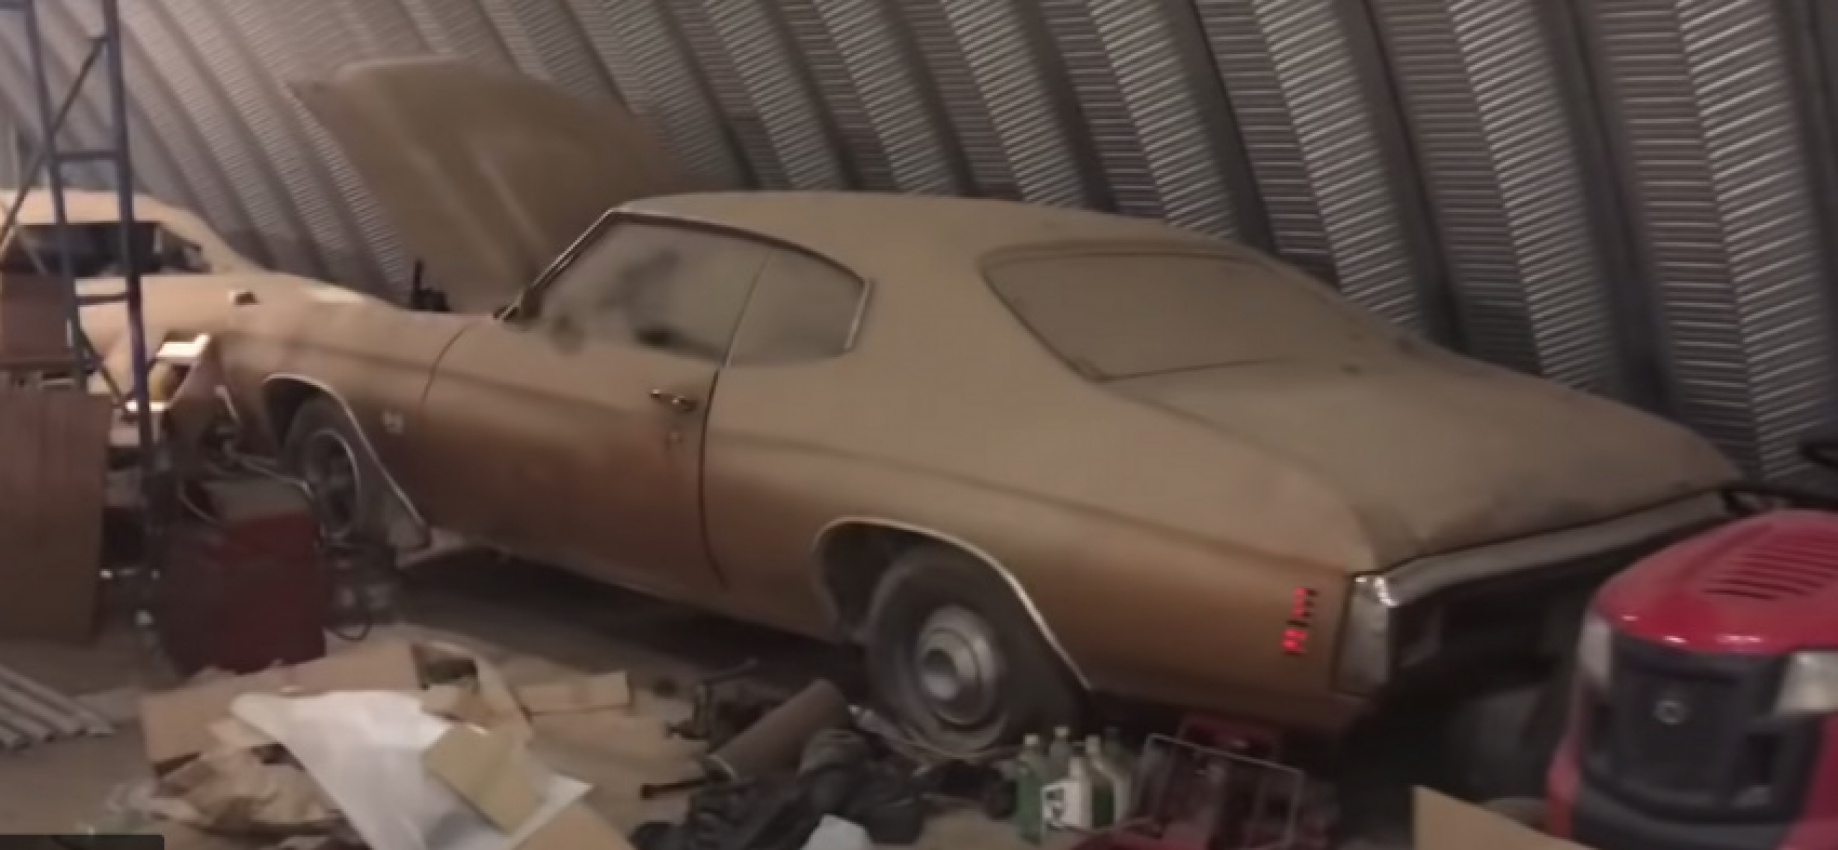 american classic, cars, classic cars, classic cars, barn find 1970 chevy chevelle ss396 collecting dust for over 40 years